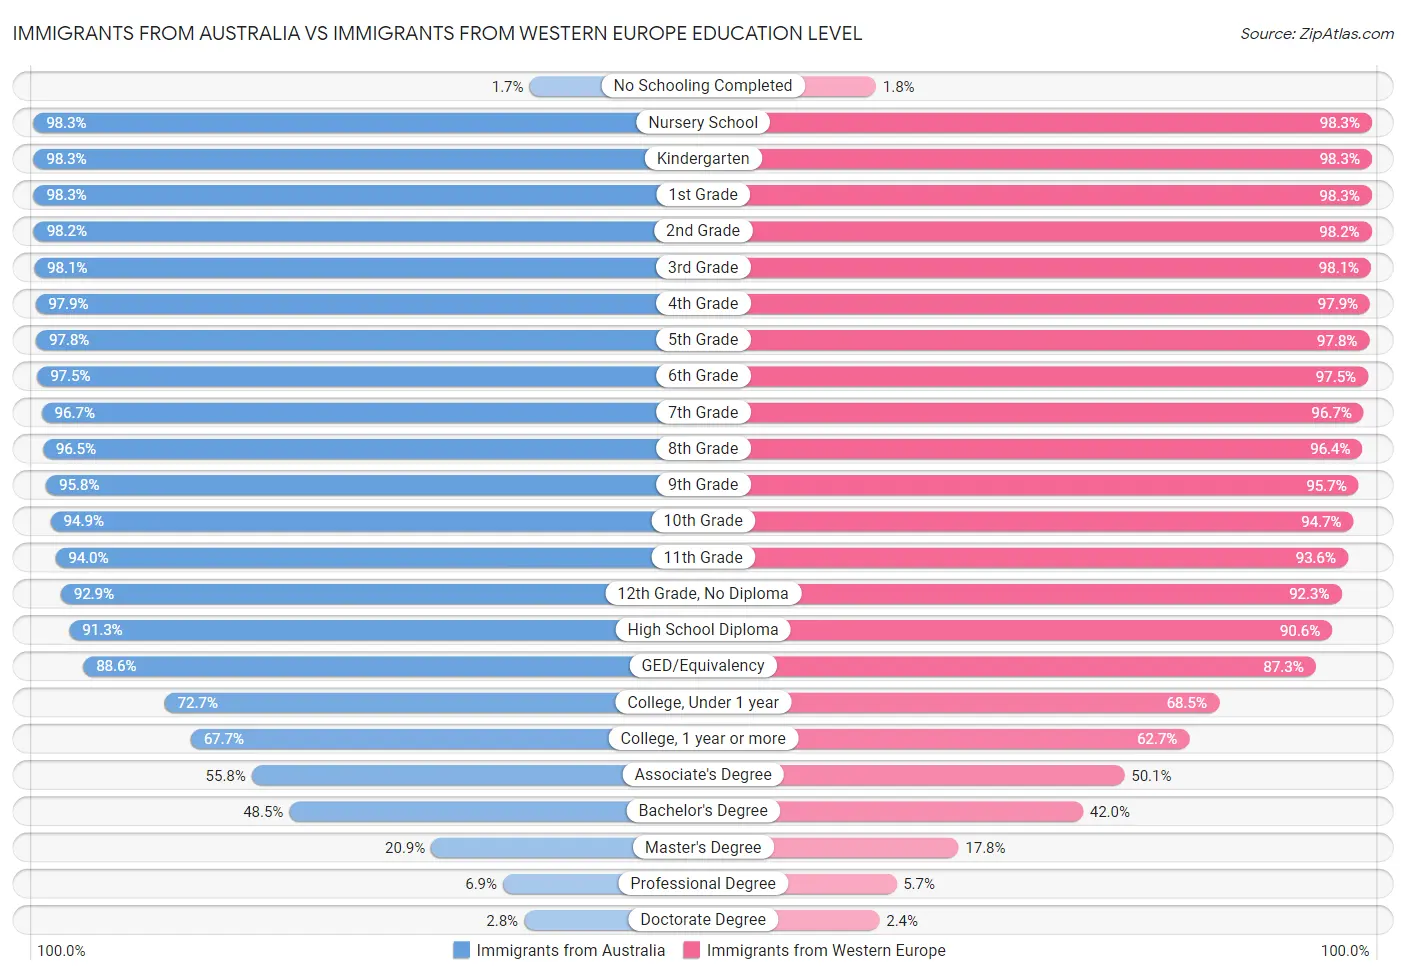 Immigrants from Australia vs Immigrants from Western Europe Education Level